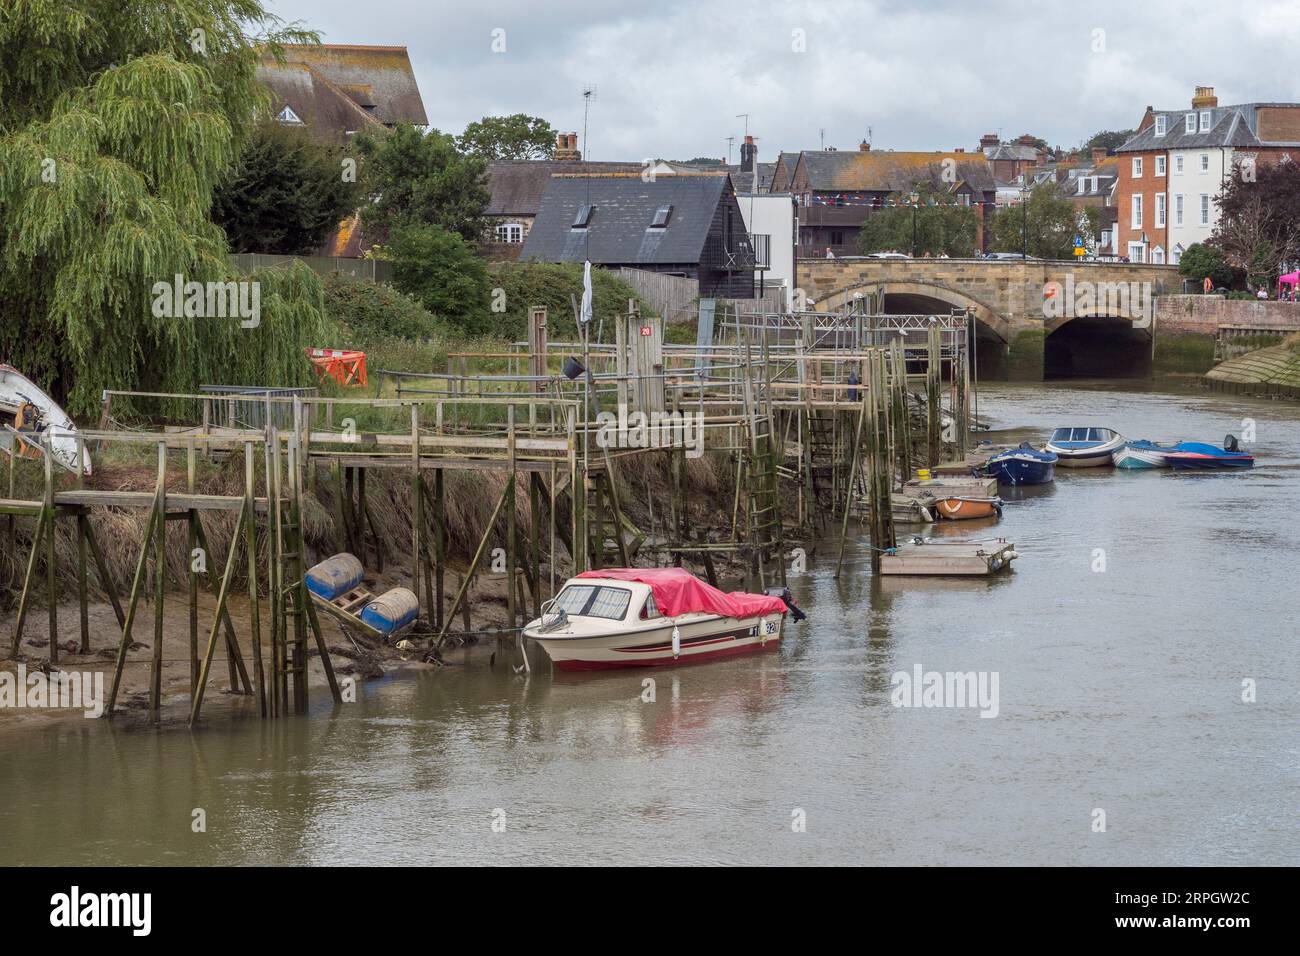 With the tide out, boats lie low on their mooring on the River Arun in Arundel, West Sussex, UK. Stock Photo